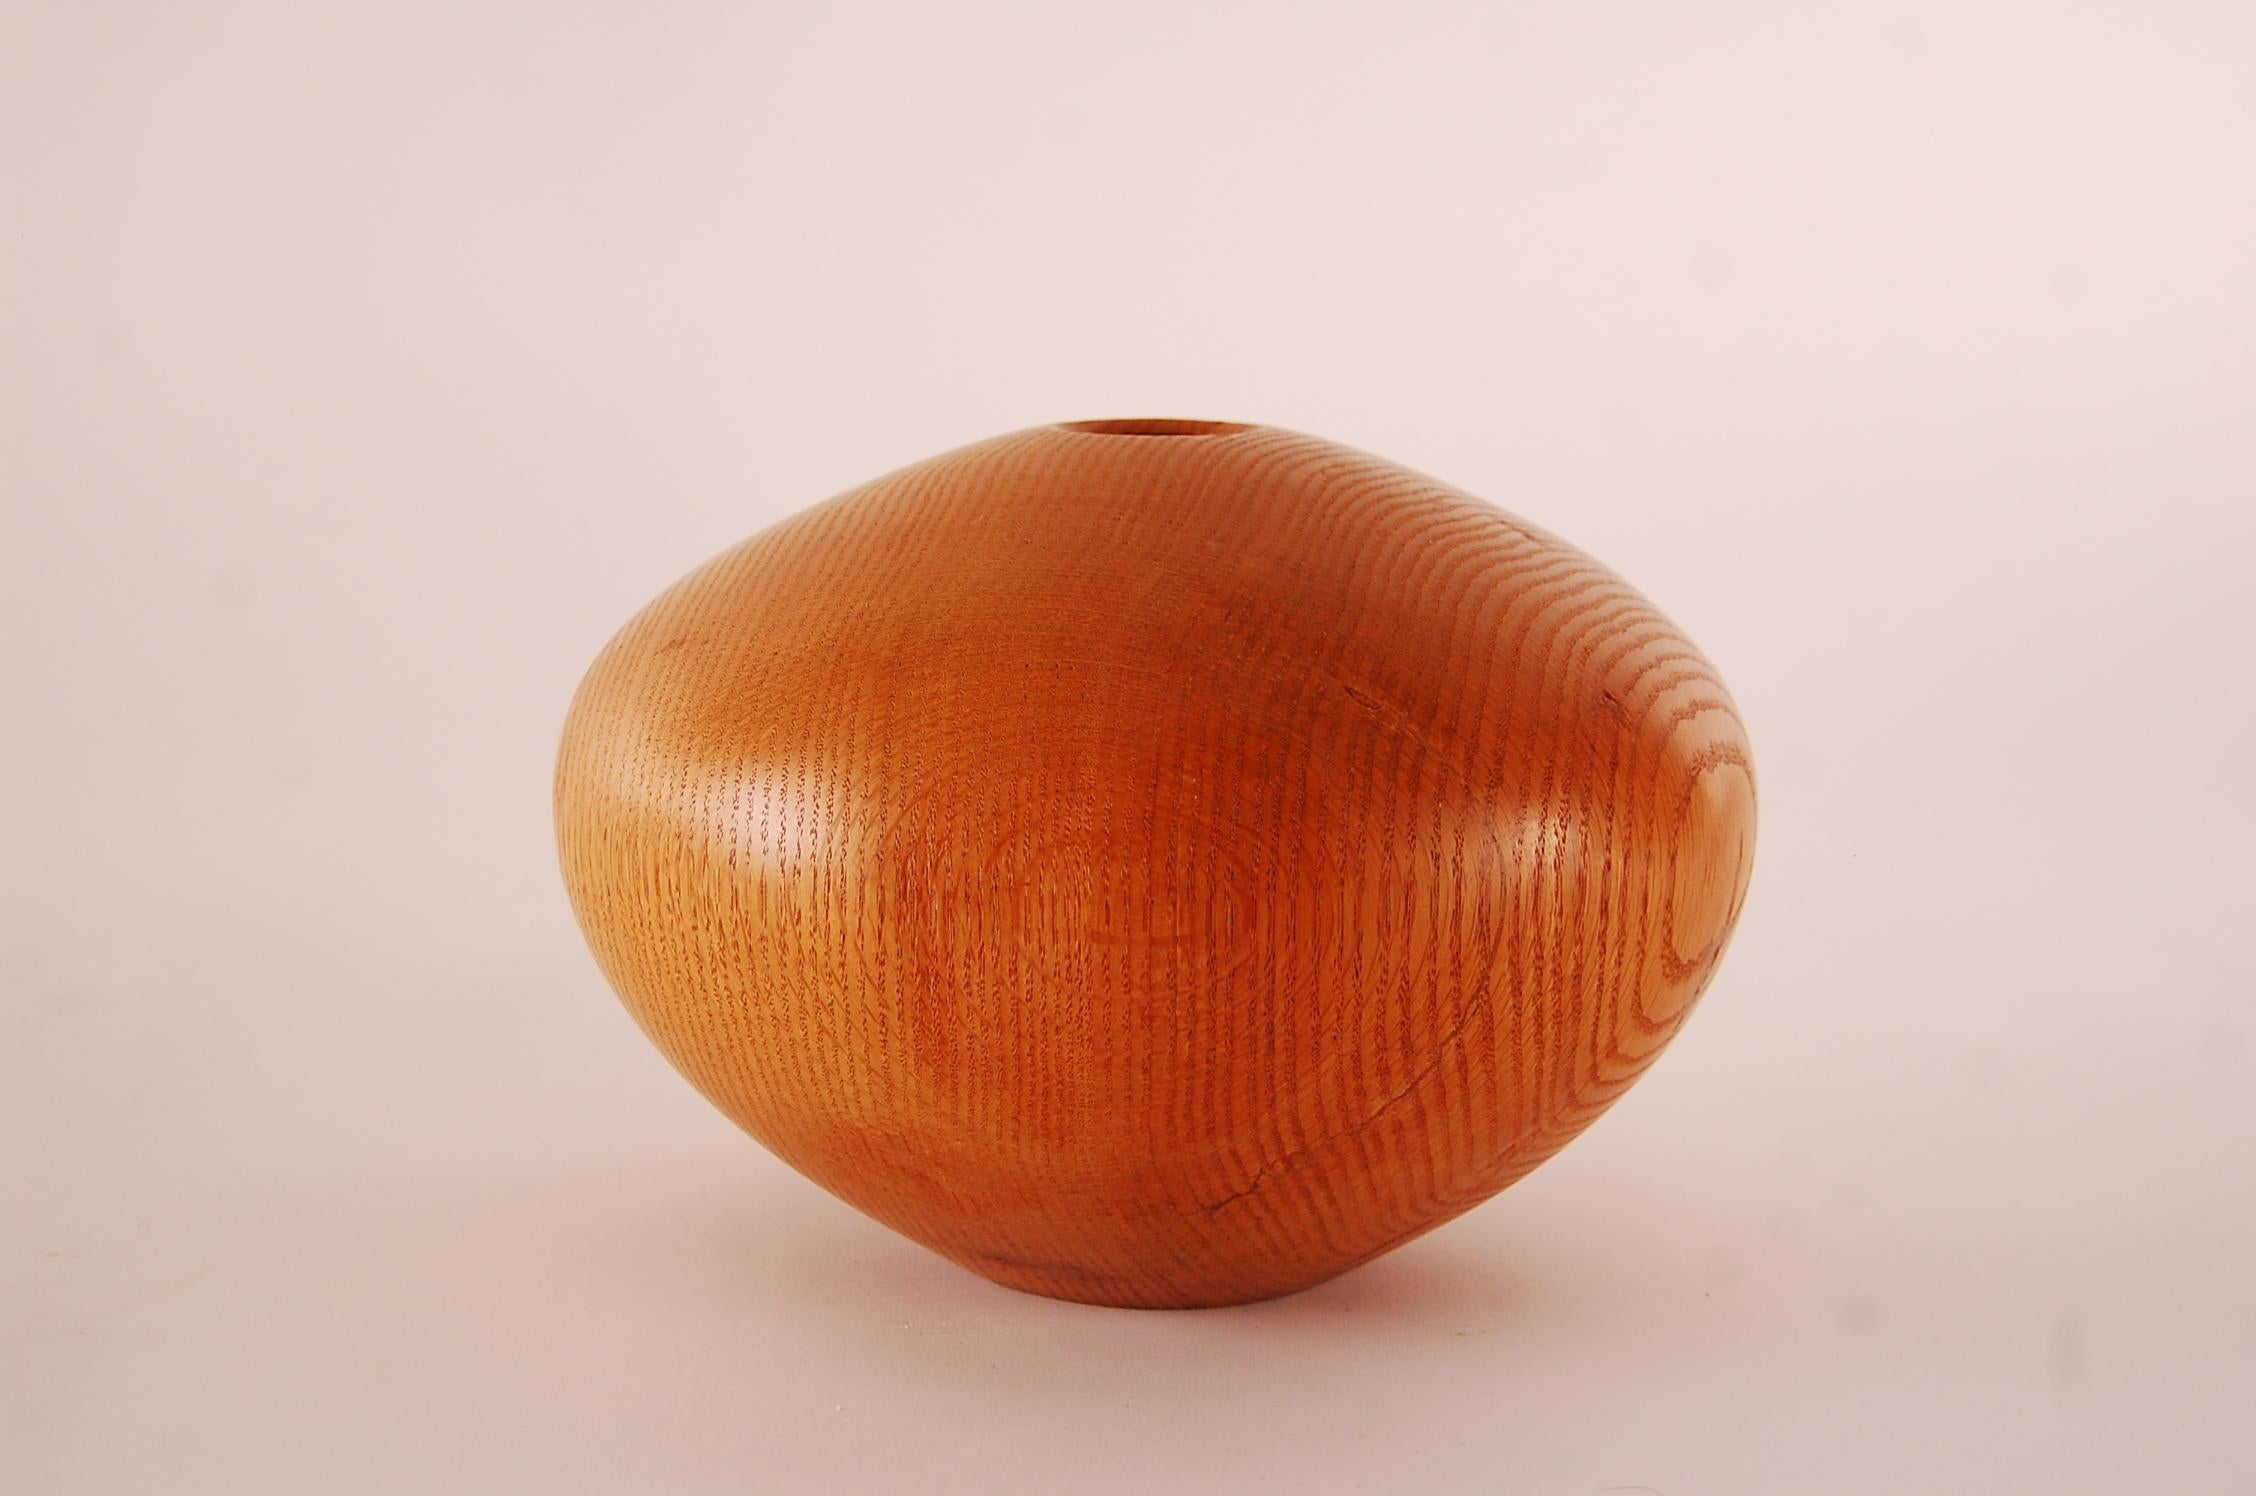 Beautiful hollow form vase in red oak, by master wood-turner Ron Pessolano, circa 1990.